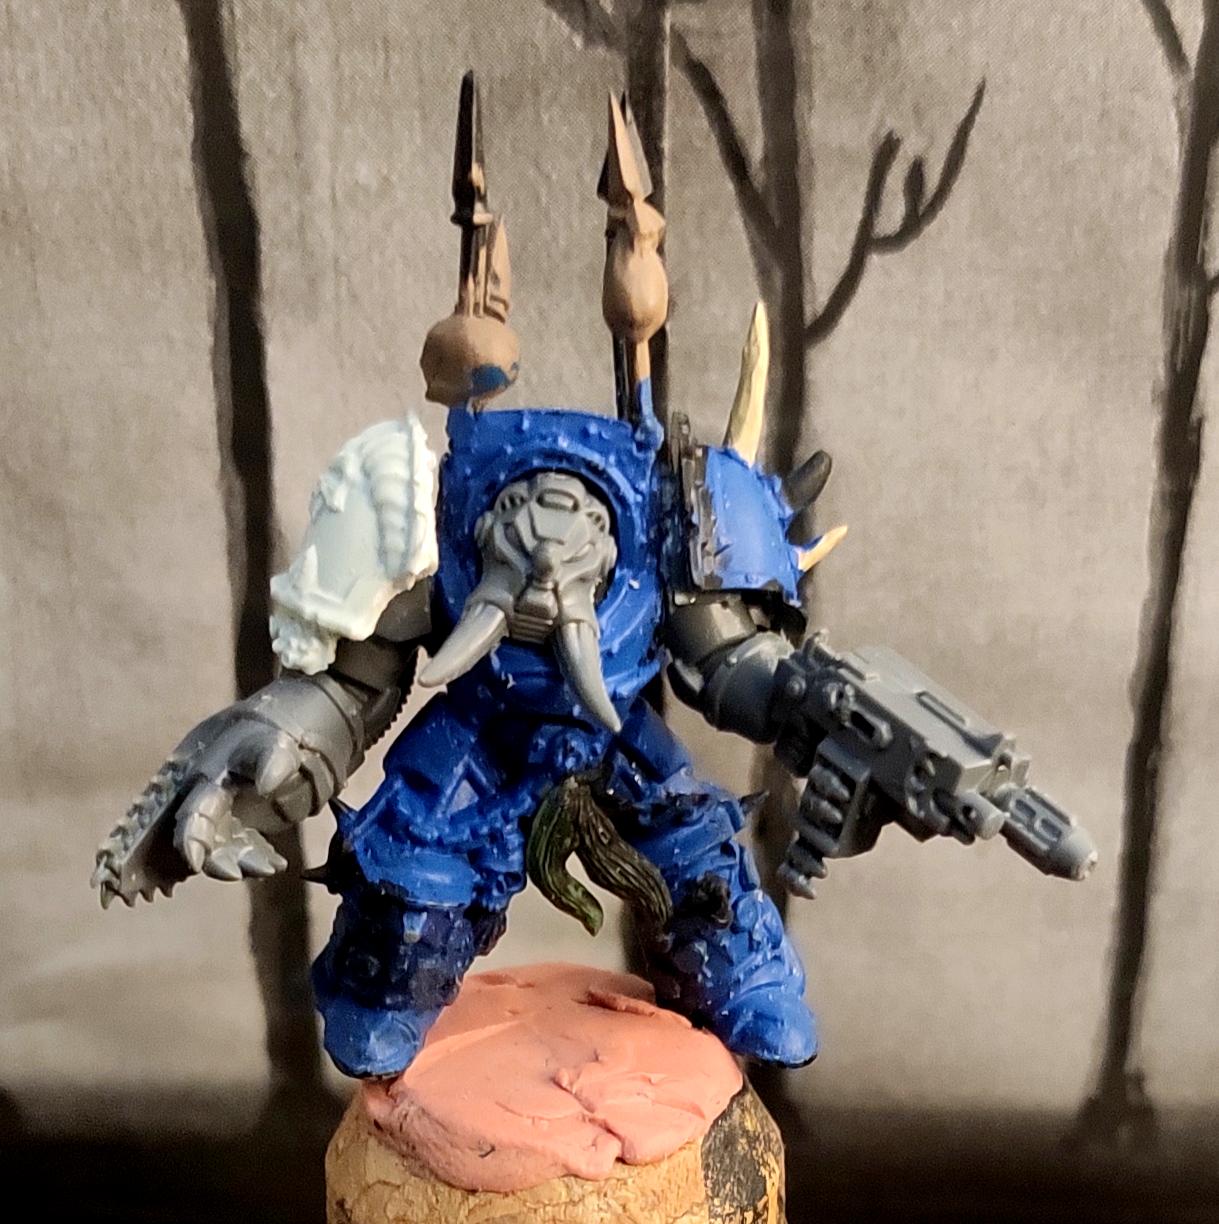 Alpha Legion, Casting, Chain Fist, Chaos, Chaos Space Marines, Combiweapon, Conversion, Heresy, Heretic Astartes, Hydra Dominatus, Infantry, Kitbash, Terminator Armor, Traitor Legions, Warhammer 40,000, Work In Progress